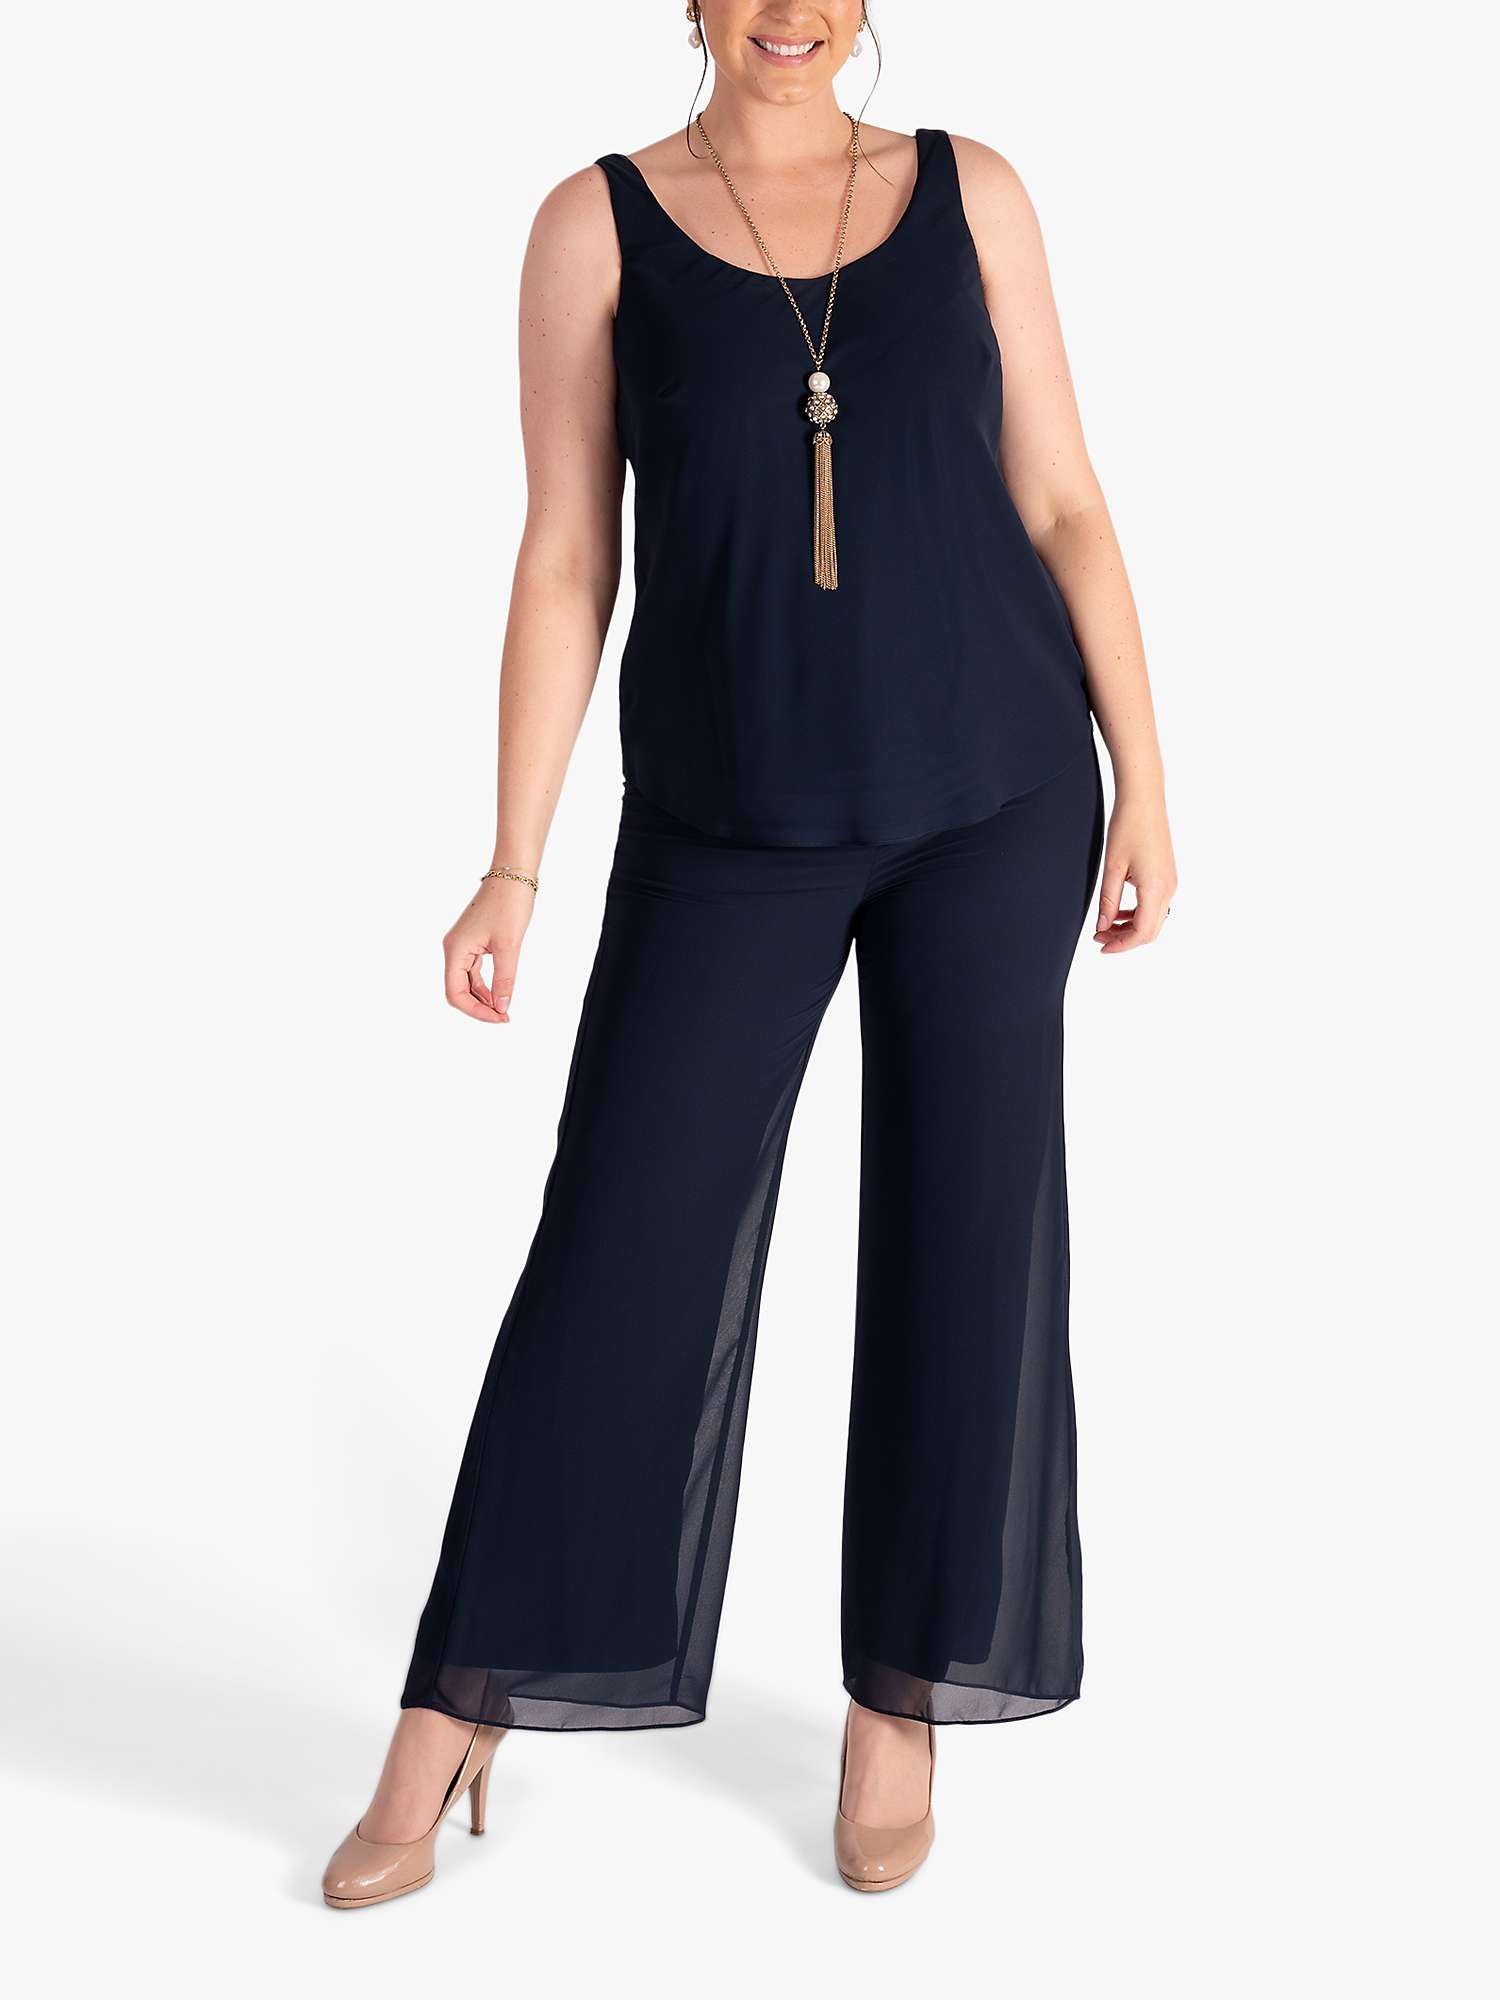 Buy chesca Chiffon Scoop Neck Camisole, Navy Online at johnlewis.com